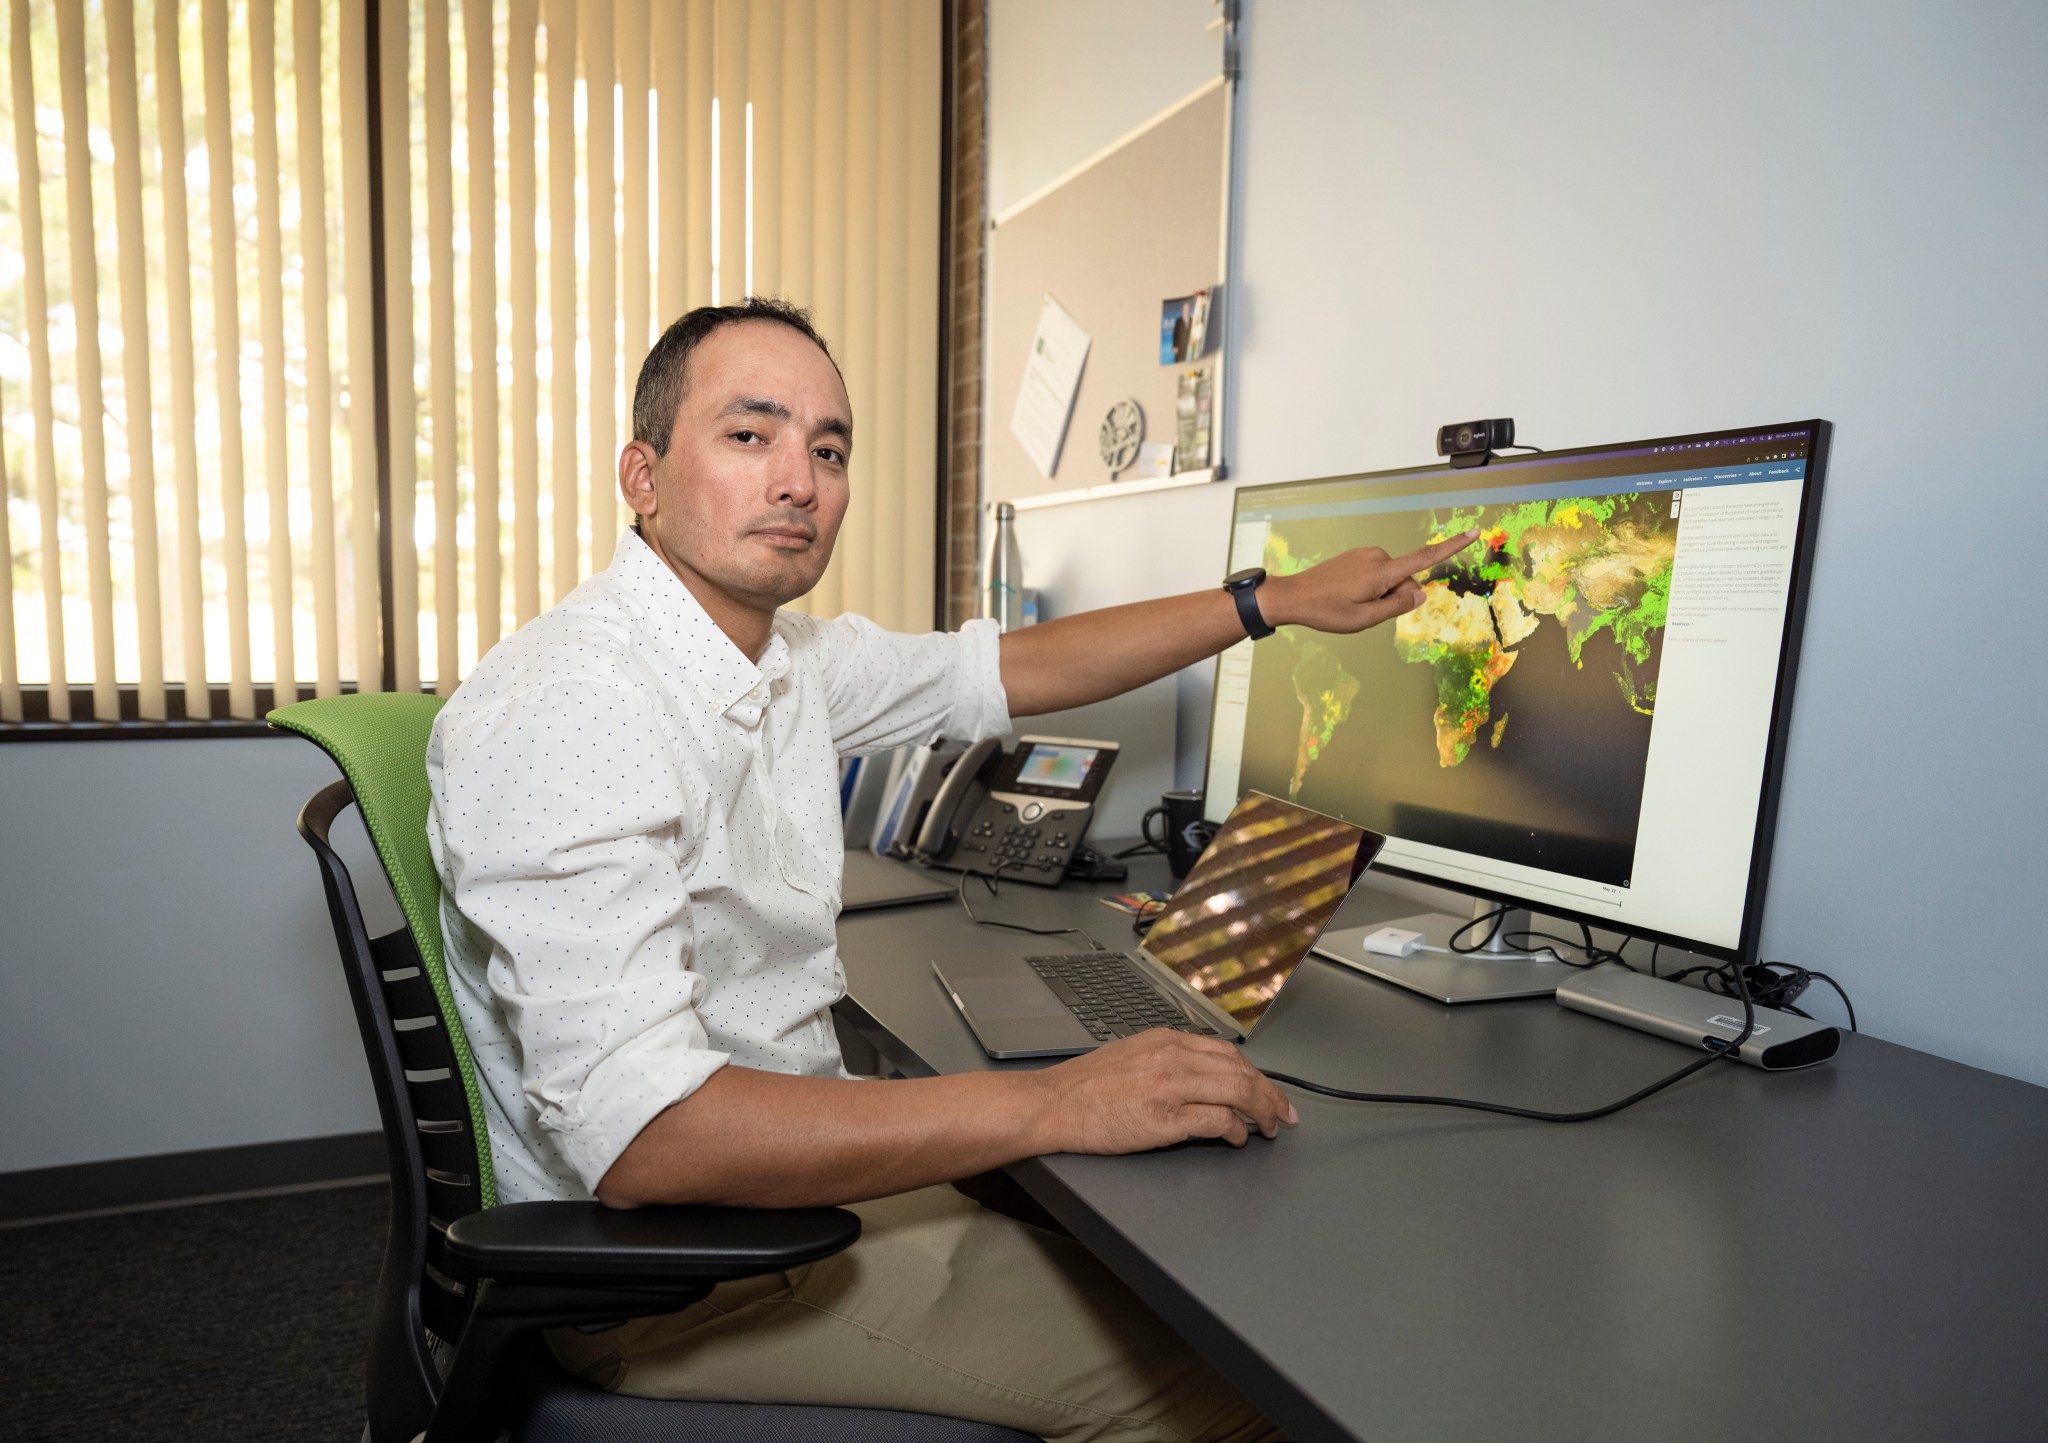 Dr. Manil Maskey, a data scientist at NASA’s Marshall Space Flight Center, is sitting at his desk showing the Earth Observing Dashboard on his computer.